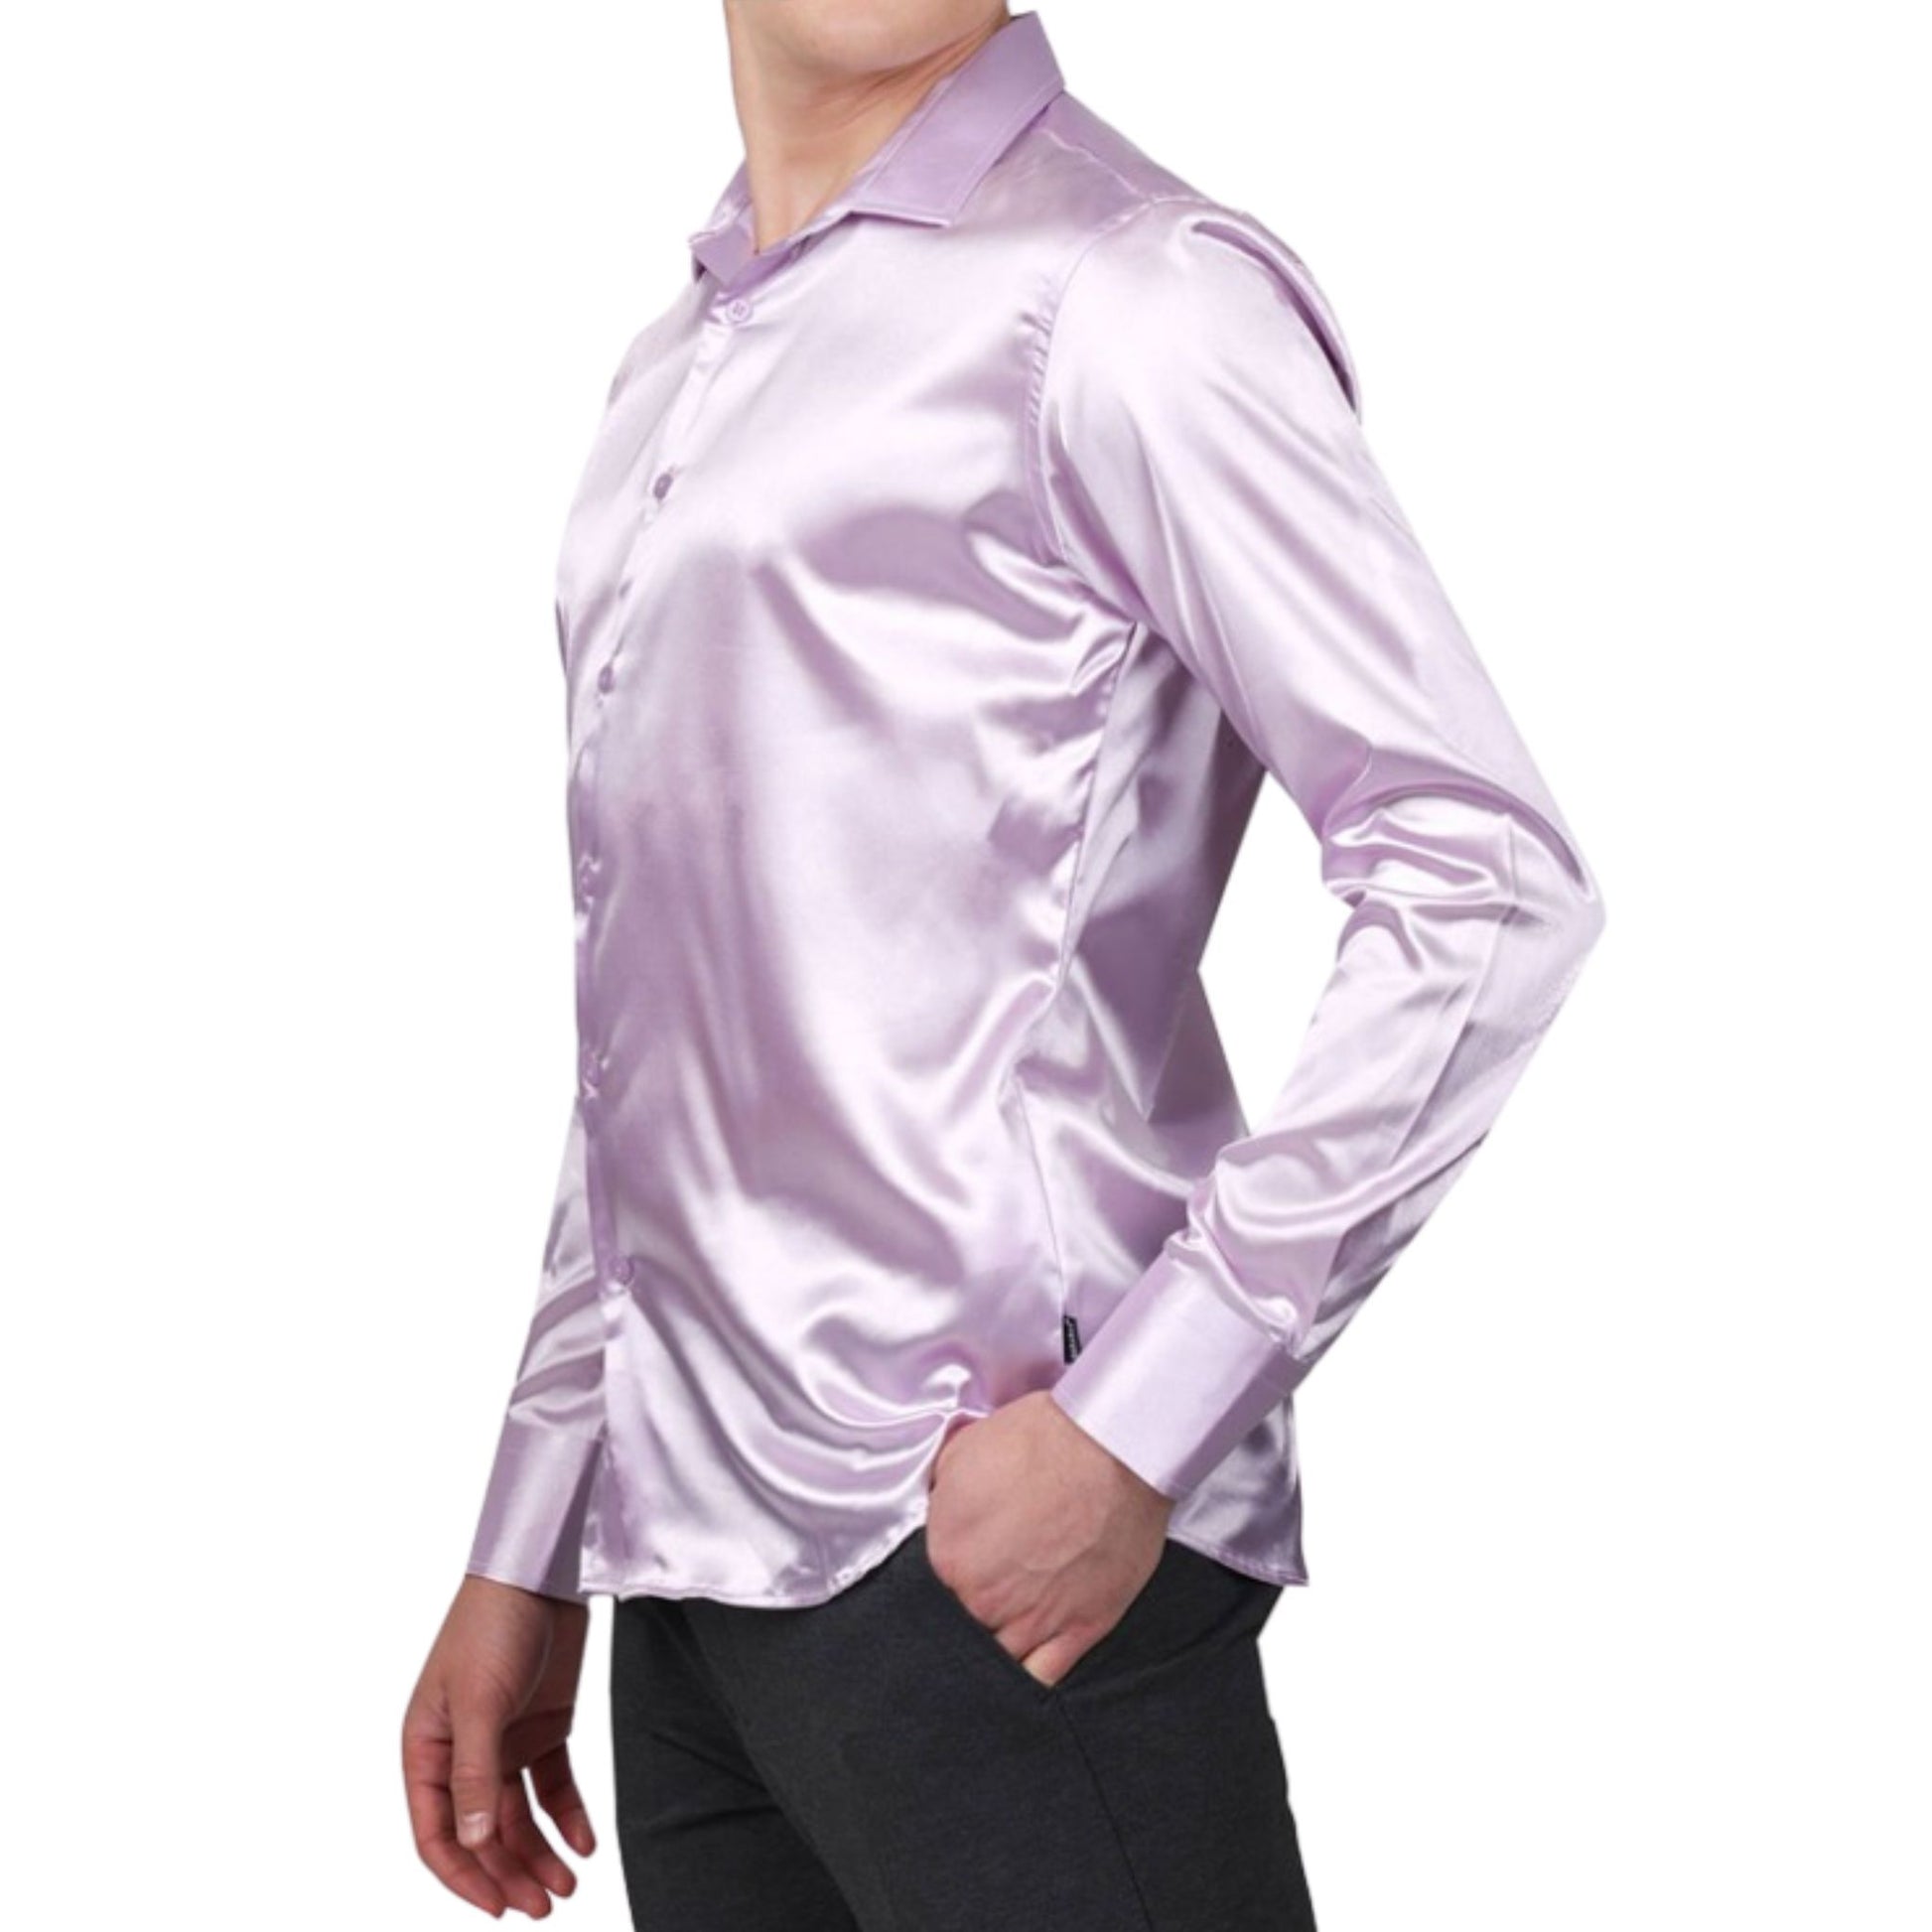 Chic KCT Menswear lavender satin dress shirt, ideal for formal events.